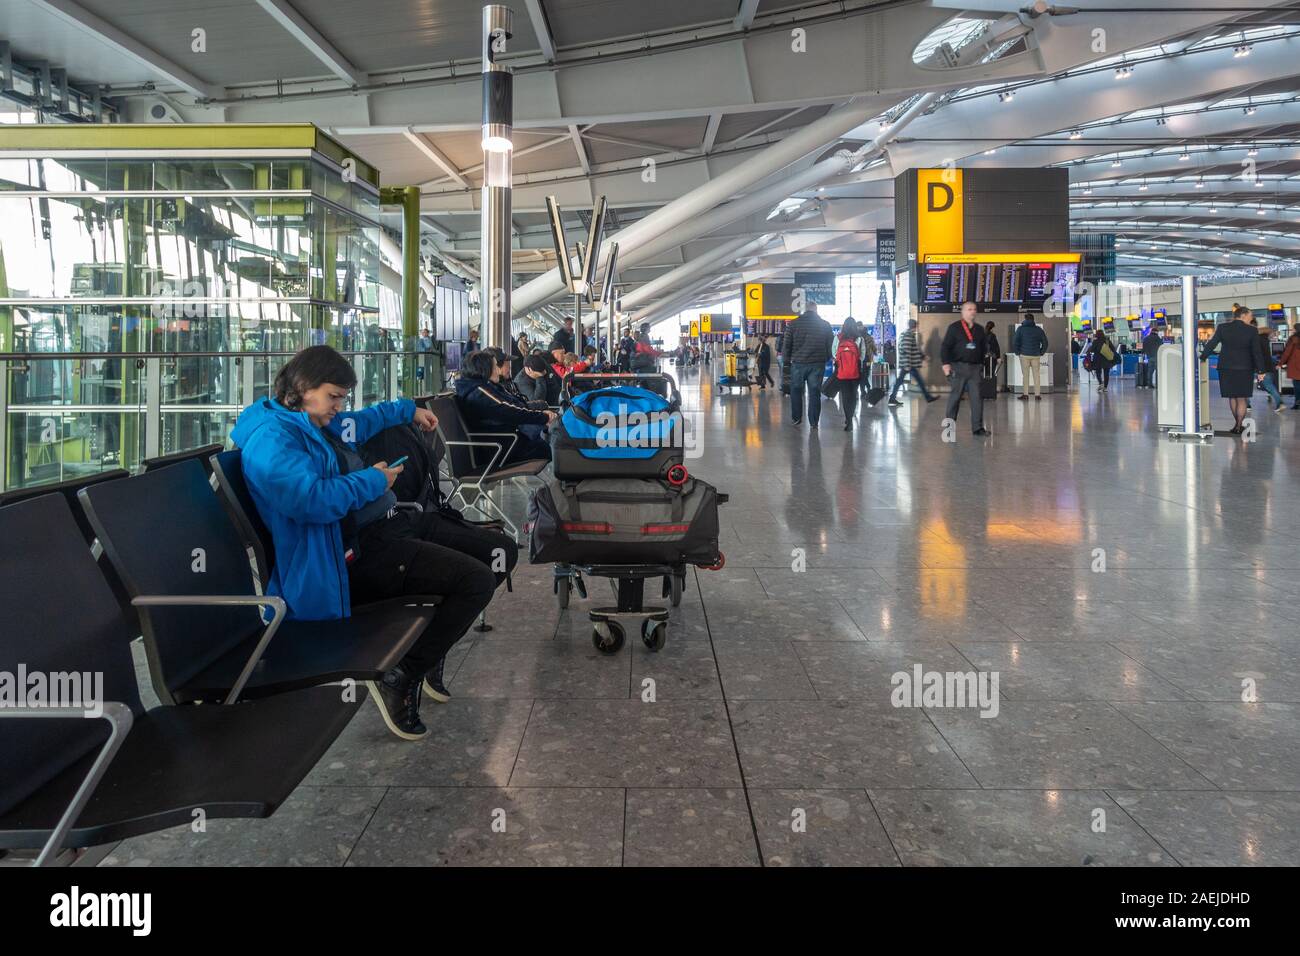 A view of the check in hall at Terminal 5, Heathrow Airport, London, UK. People sit and wait on benches. Stock Photo